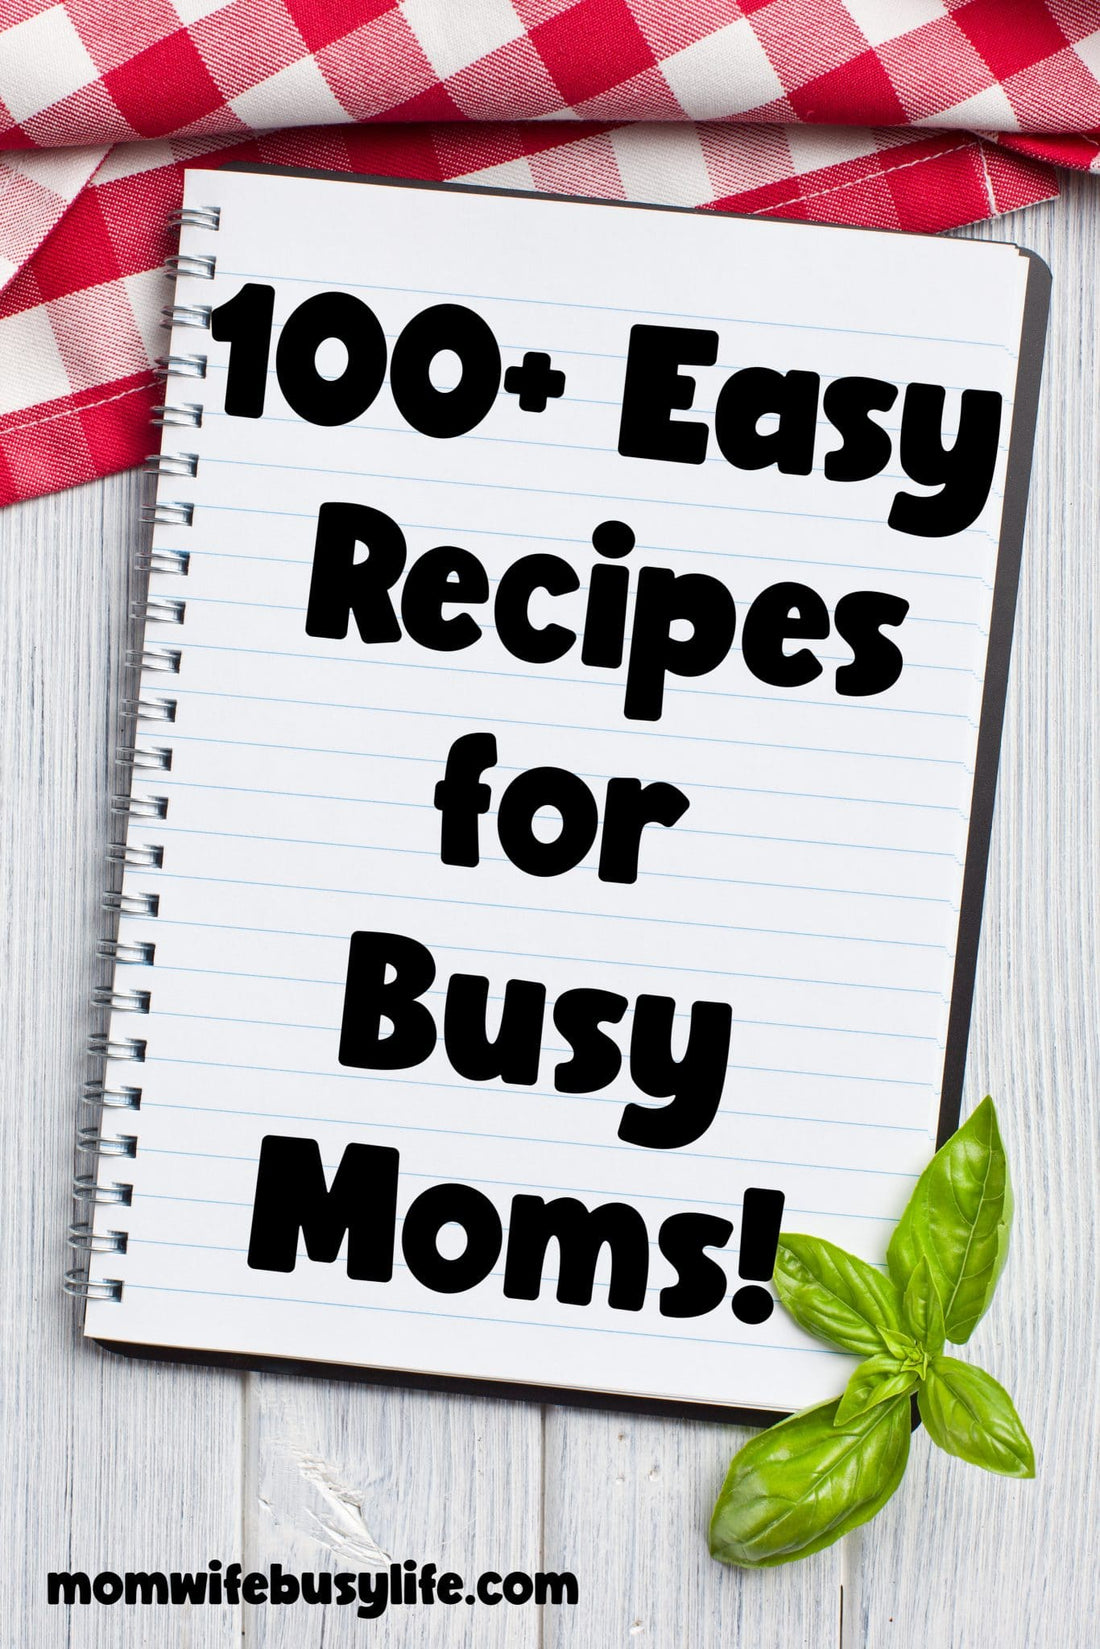 100+ Easy Recipes for Busy Moms